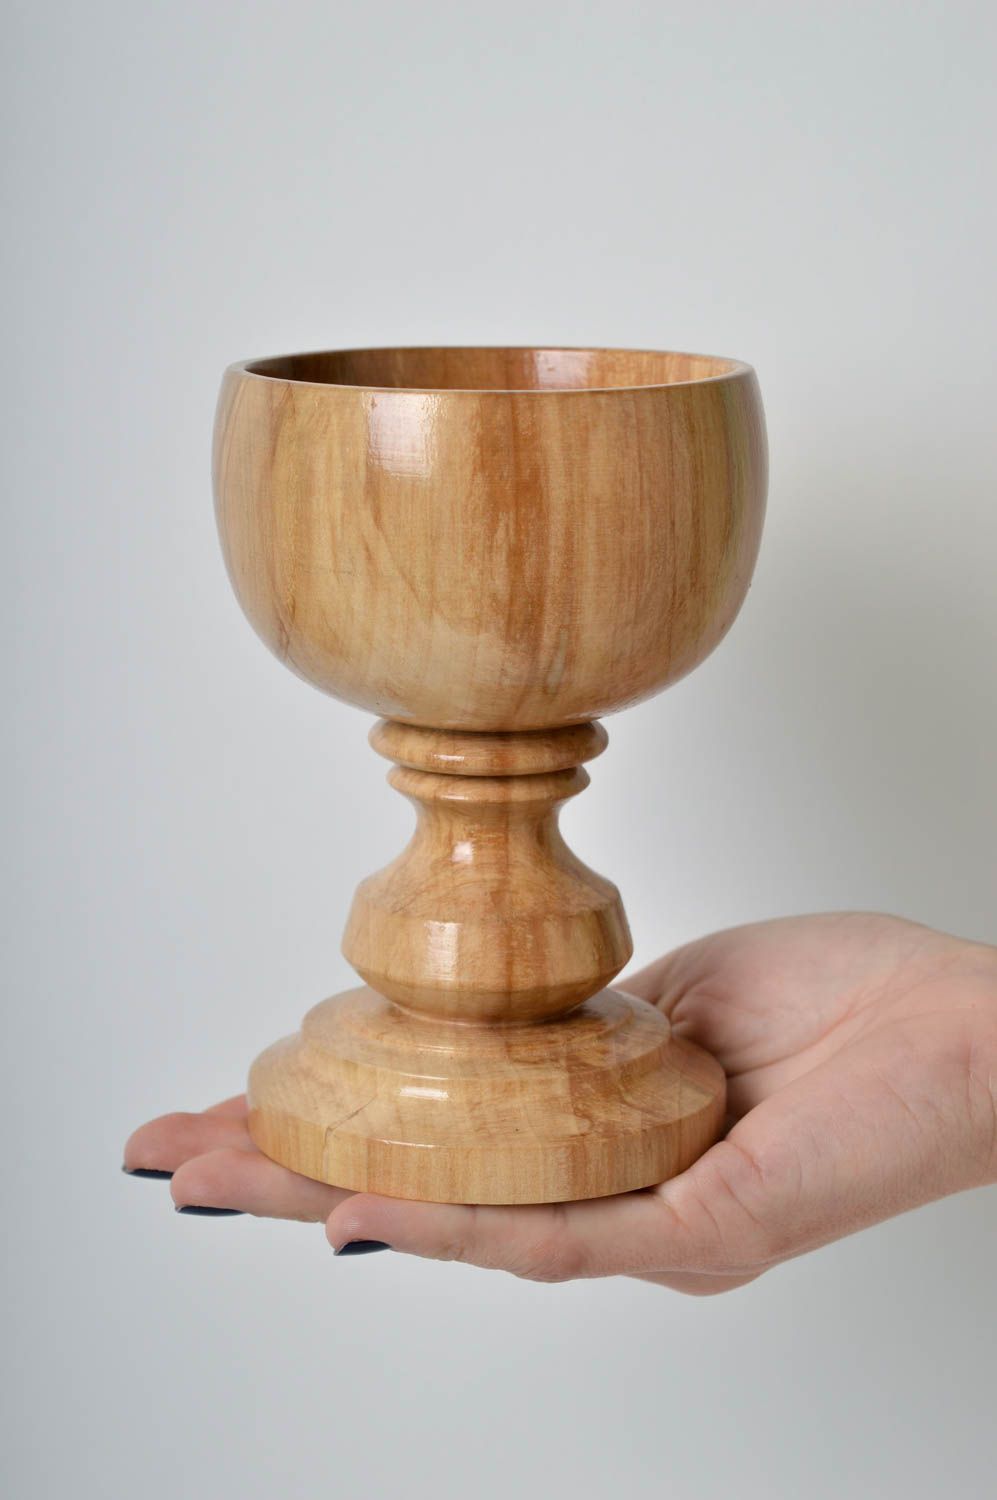 Homemade home decor wooden kitchenware decorative goblet for decorative use only photo 5